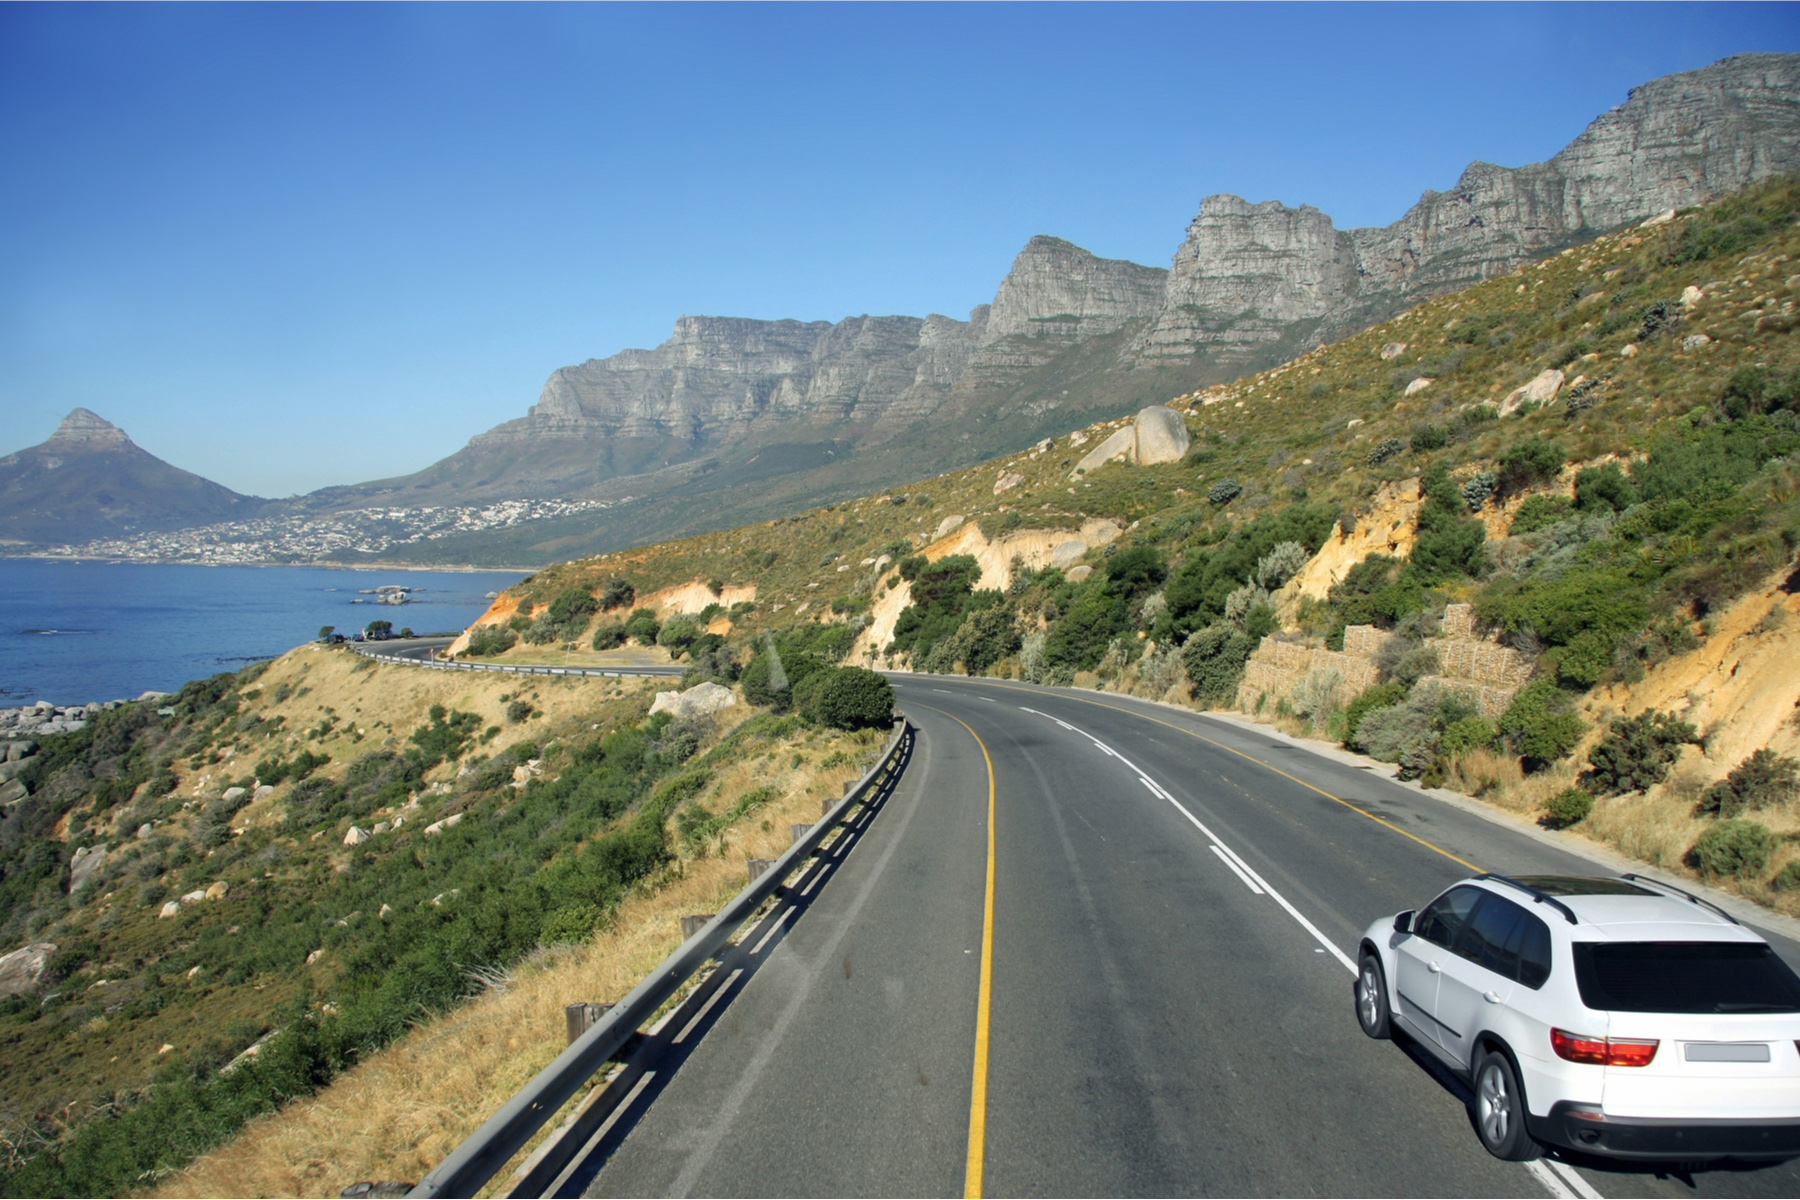 Driving along the South African coast